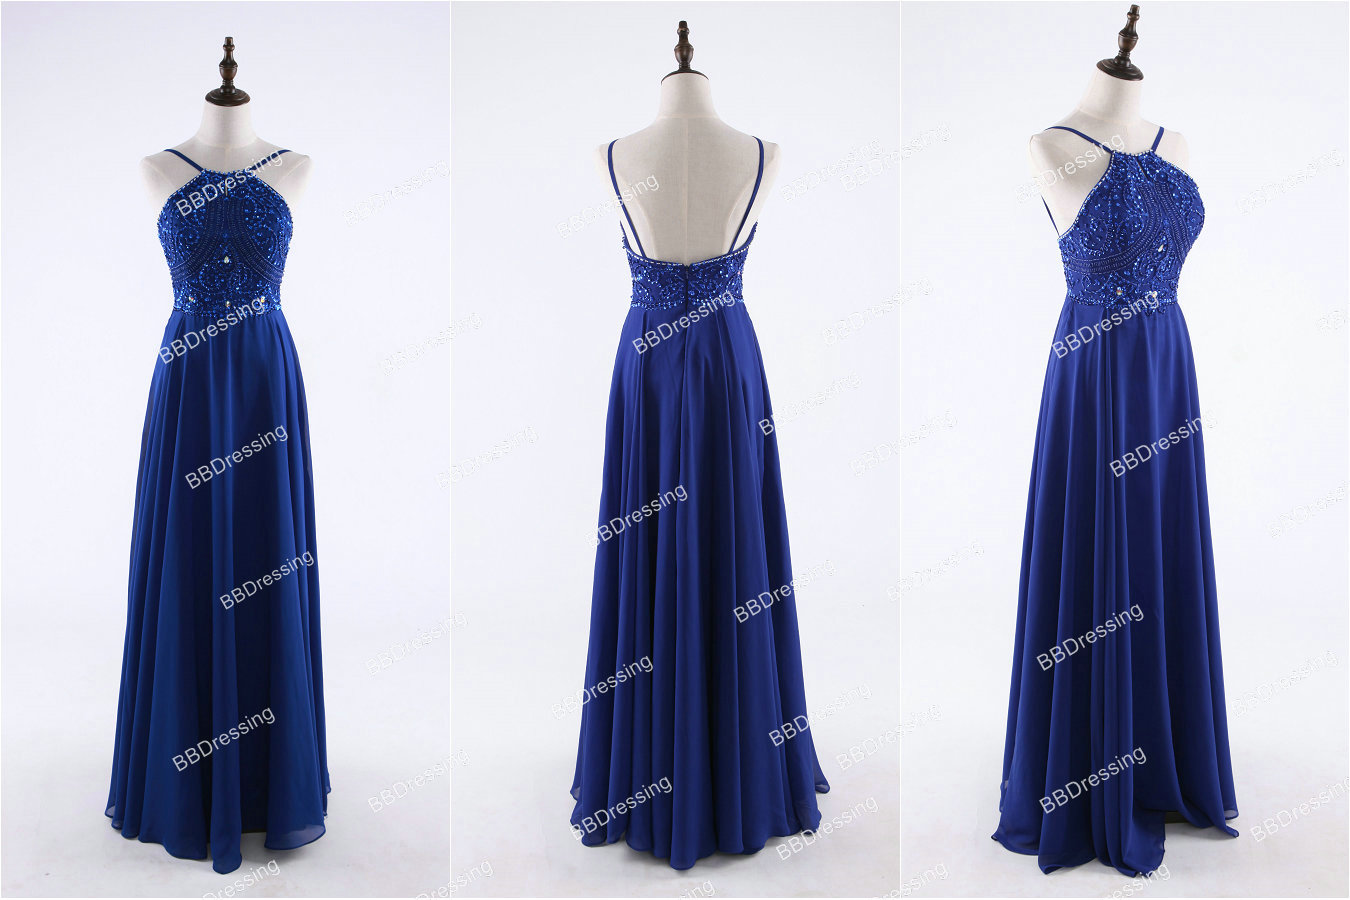 Royal Blue Prom Dress Formal Dresses Party Gown Pst0960 on Luulla